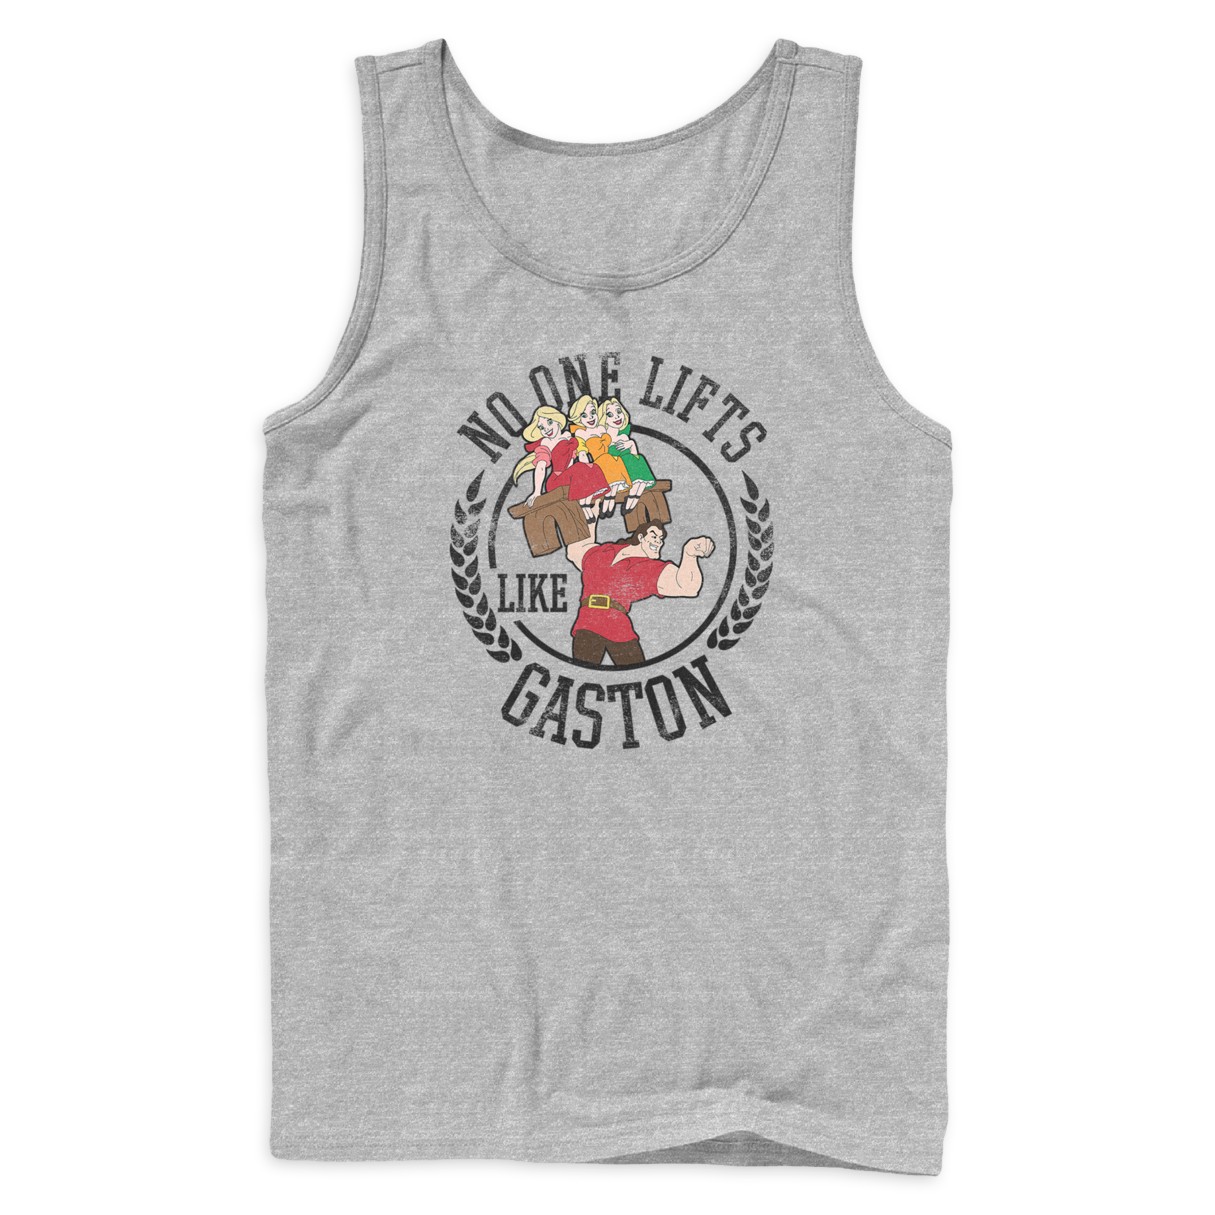 Gaston Tank Top for Adults – Beauty and the Beast